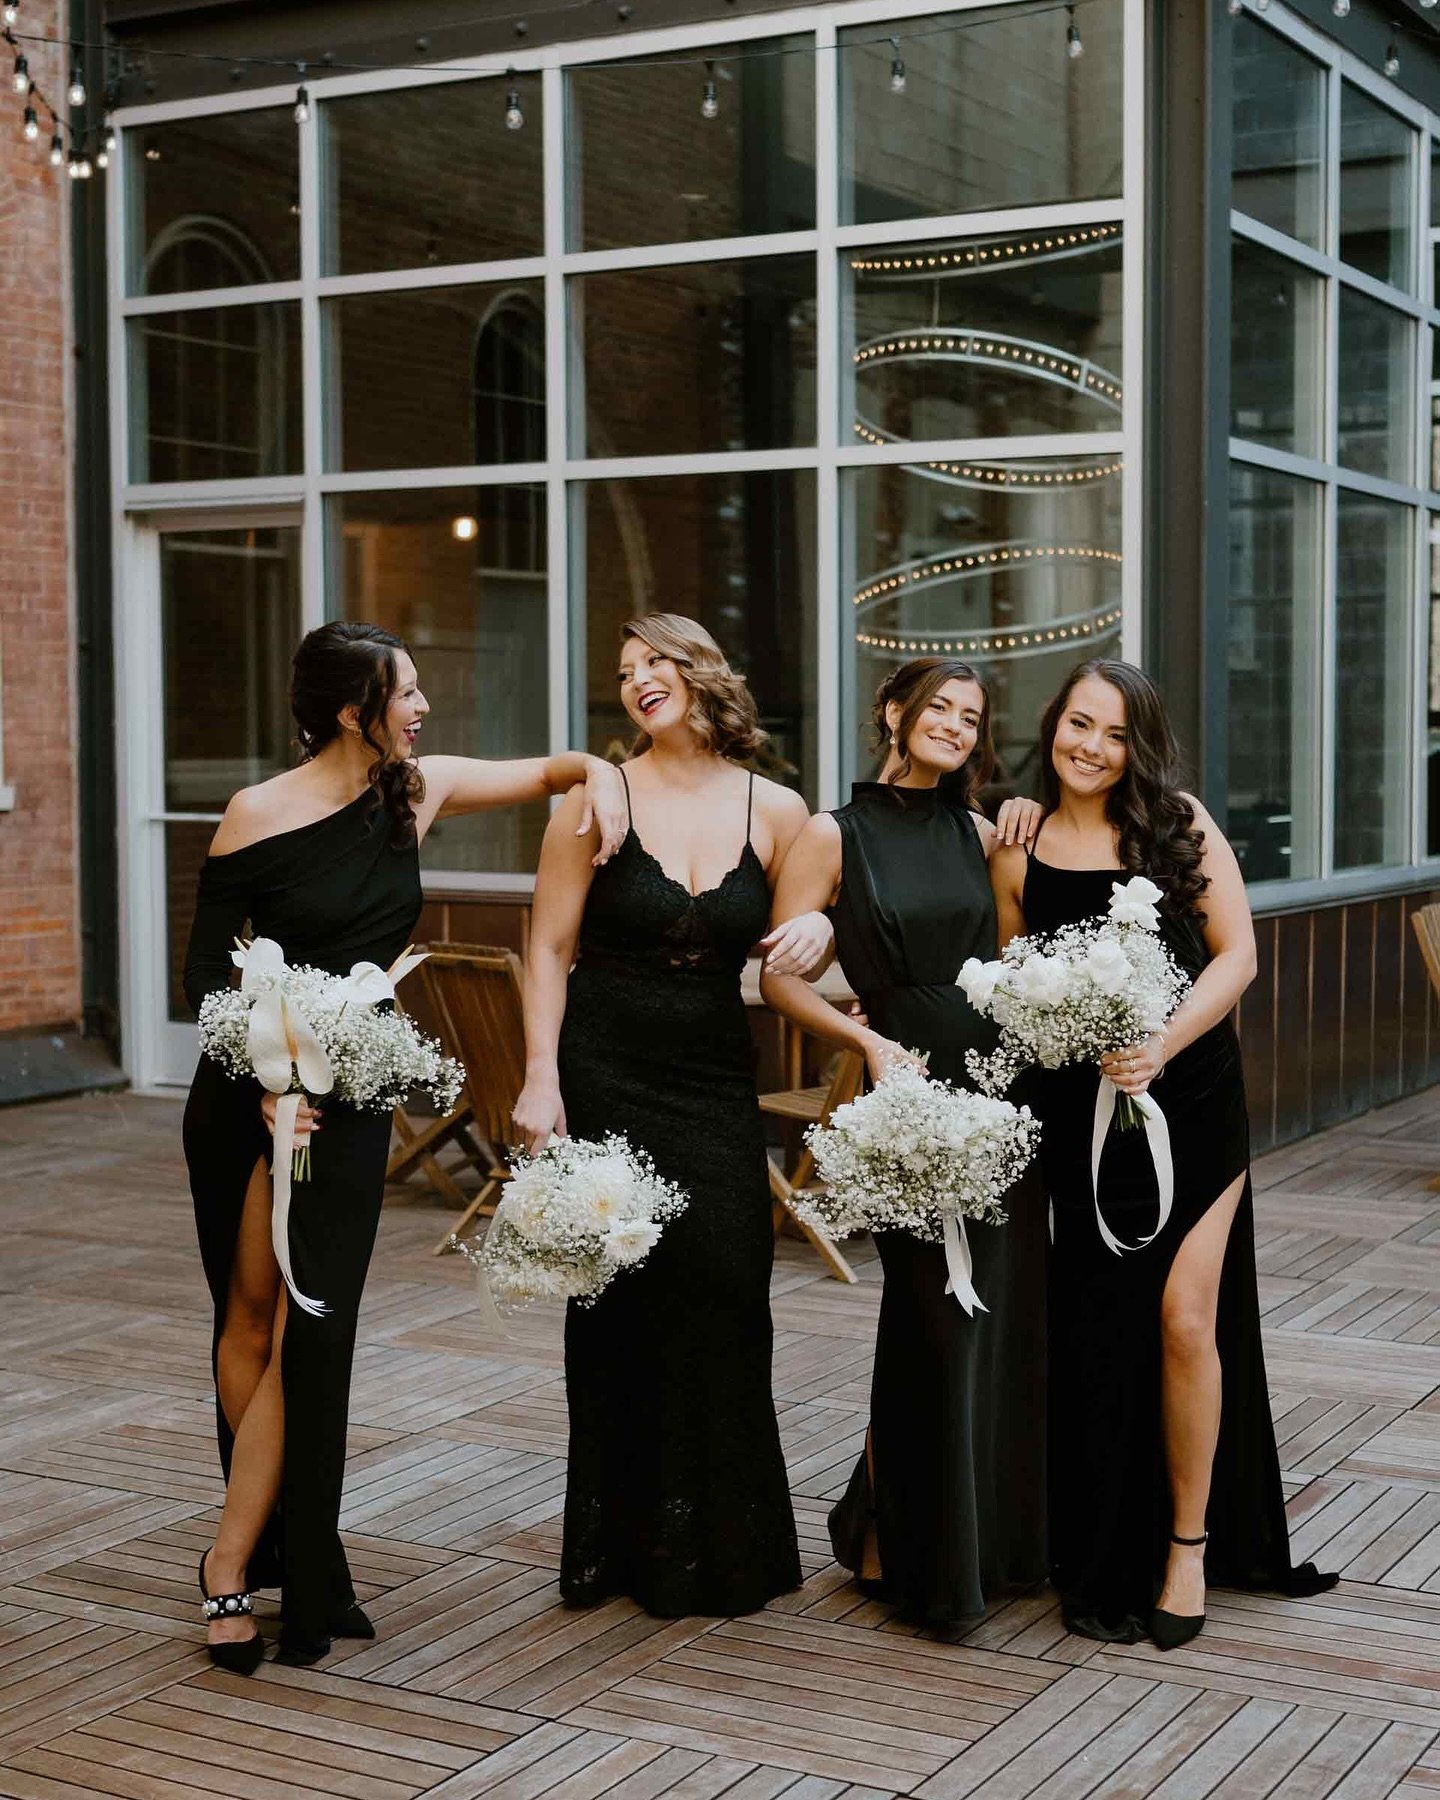 Let&rsquo;s hear it for the girls! 🎀

One of my favorite focuses on a wedding day is capturing sweet moments of your favorite people, from your VIP&rsquo;s to your friends and extended family. 

I adored this all black bridesmaid moment and knew the